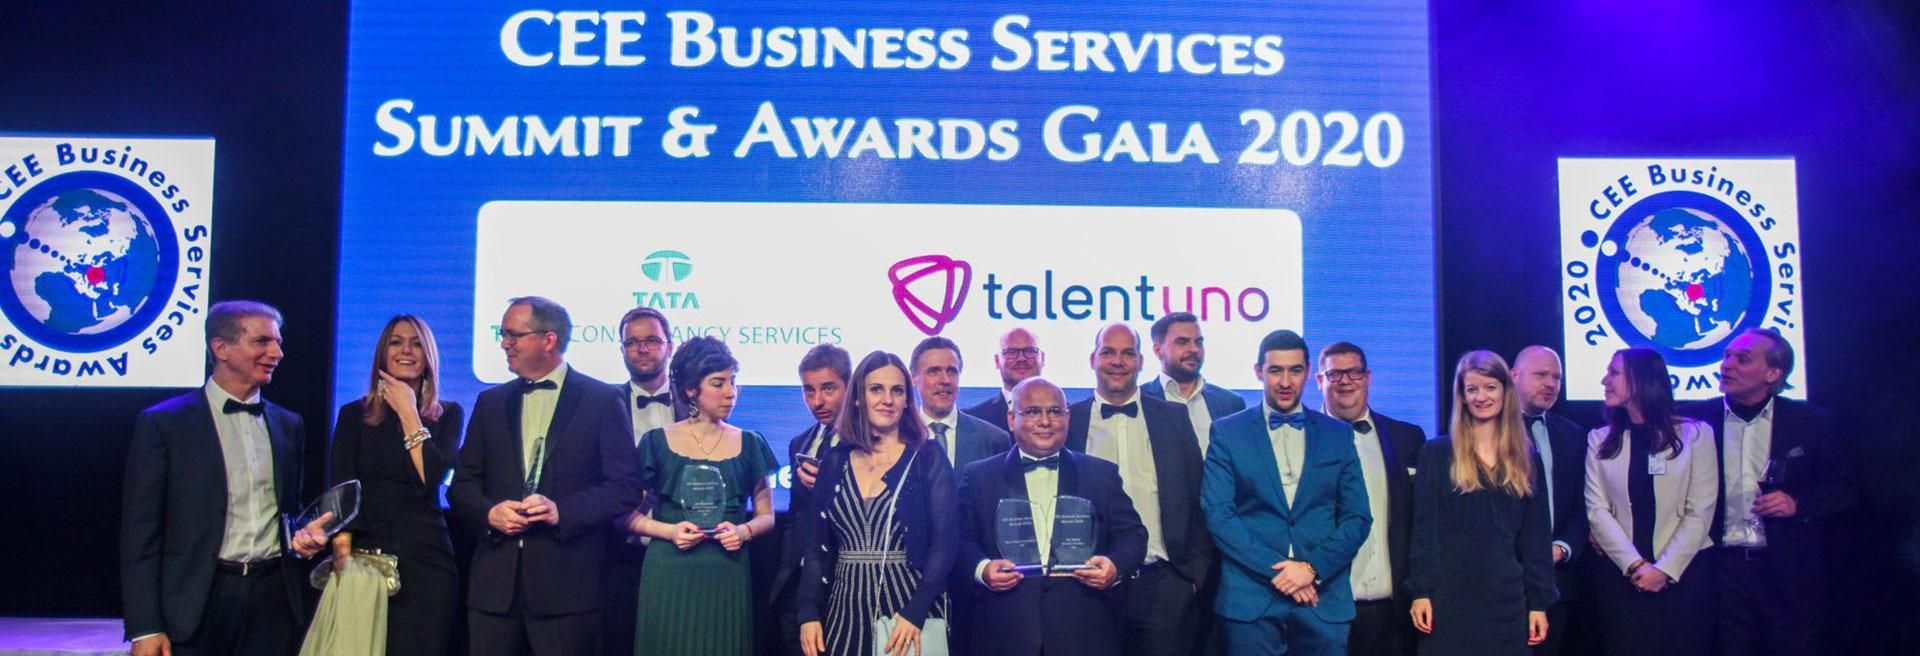 Hungarian Business Service Centres awarded in six categories at CEE Business Services Summit 2020